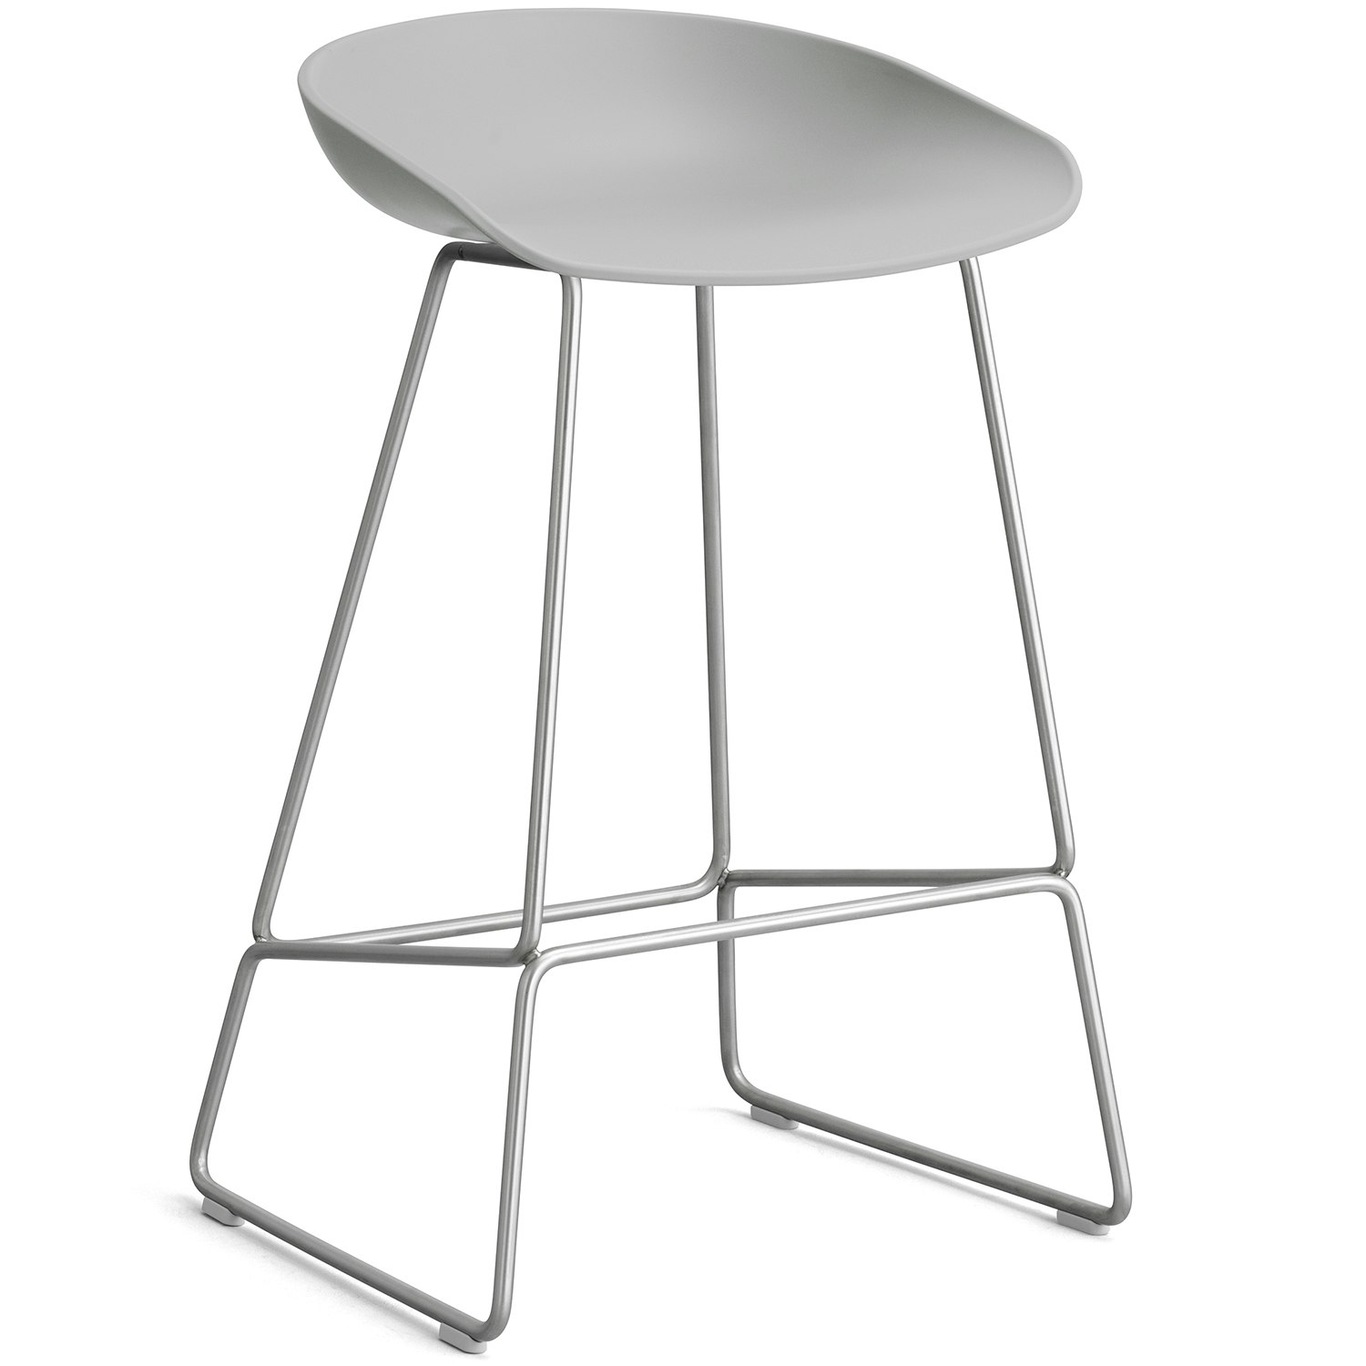 AAS 38 2.0 Bar Stool 65 cm, Stainless Steel / Concrete Grey